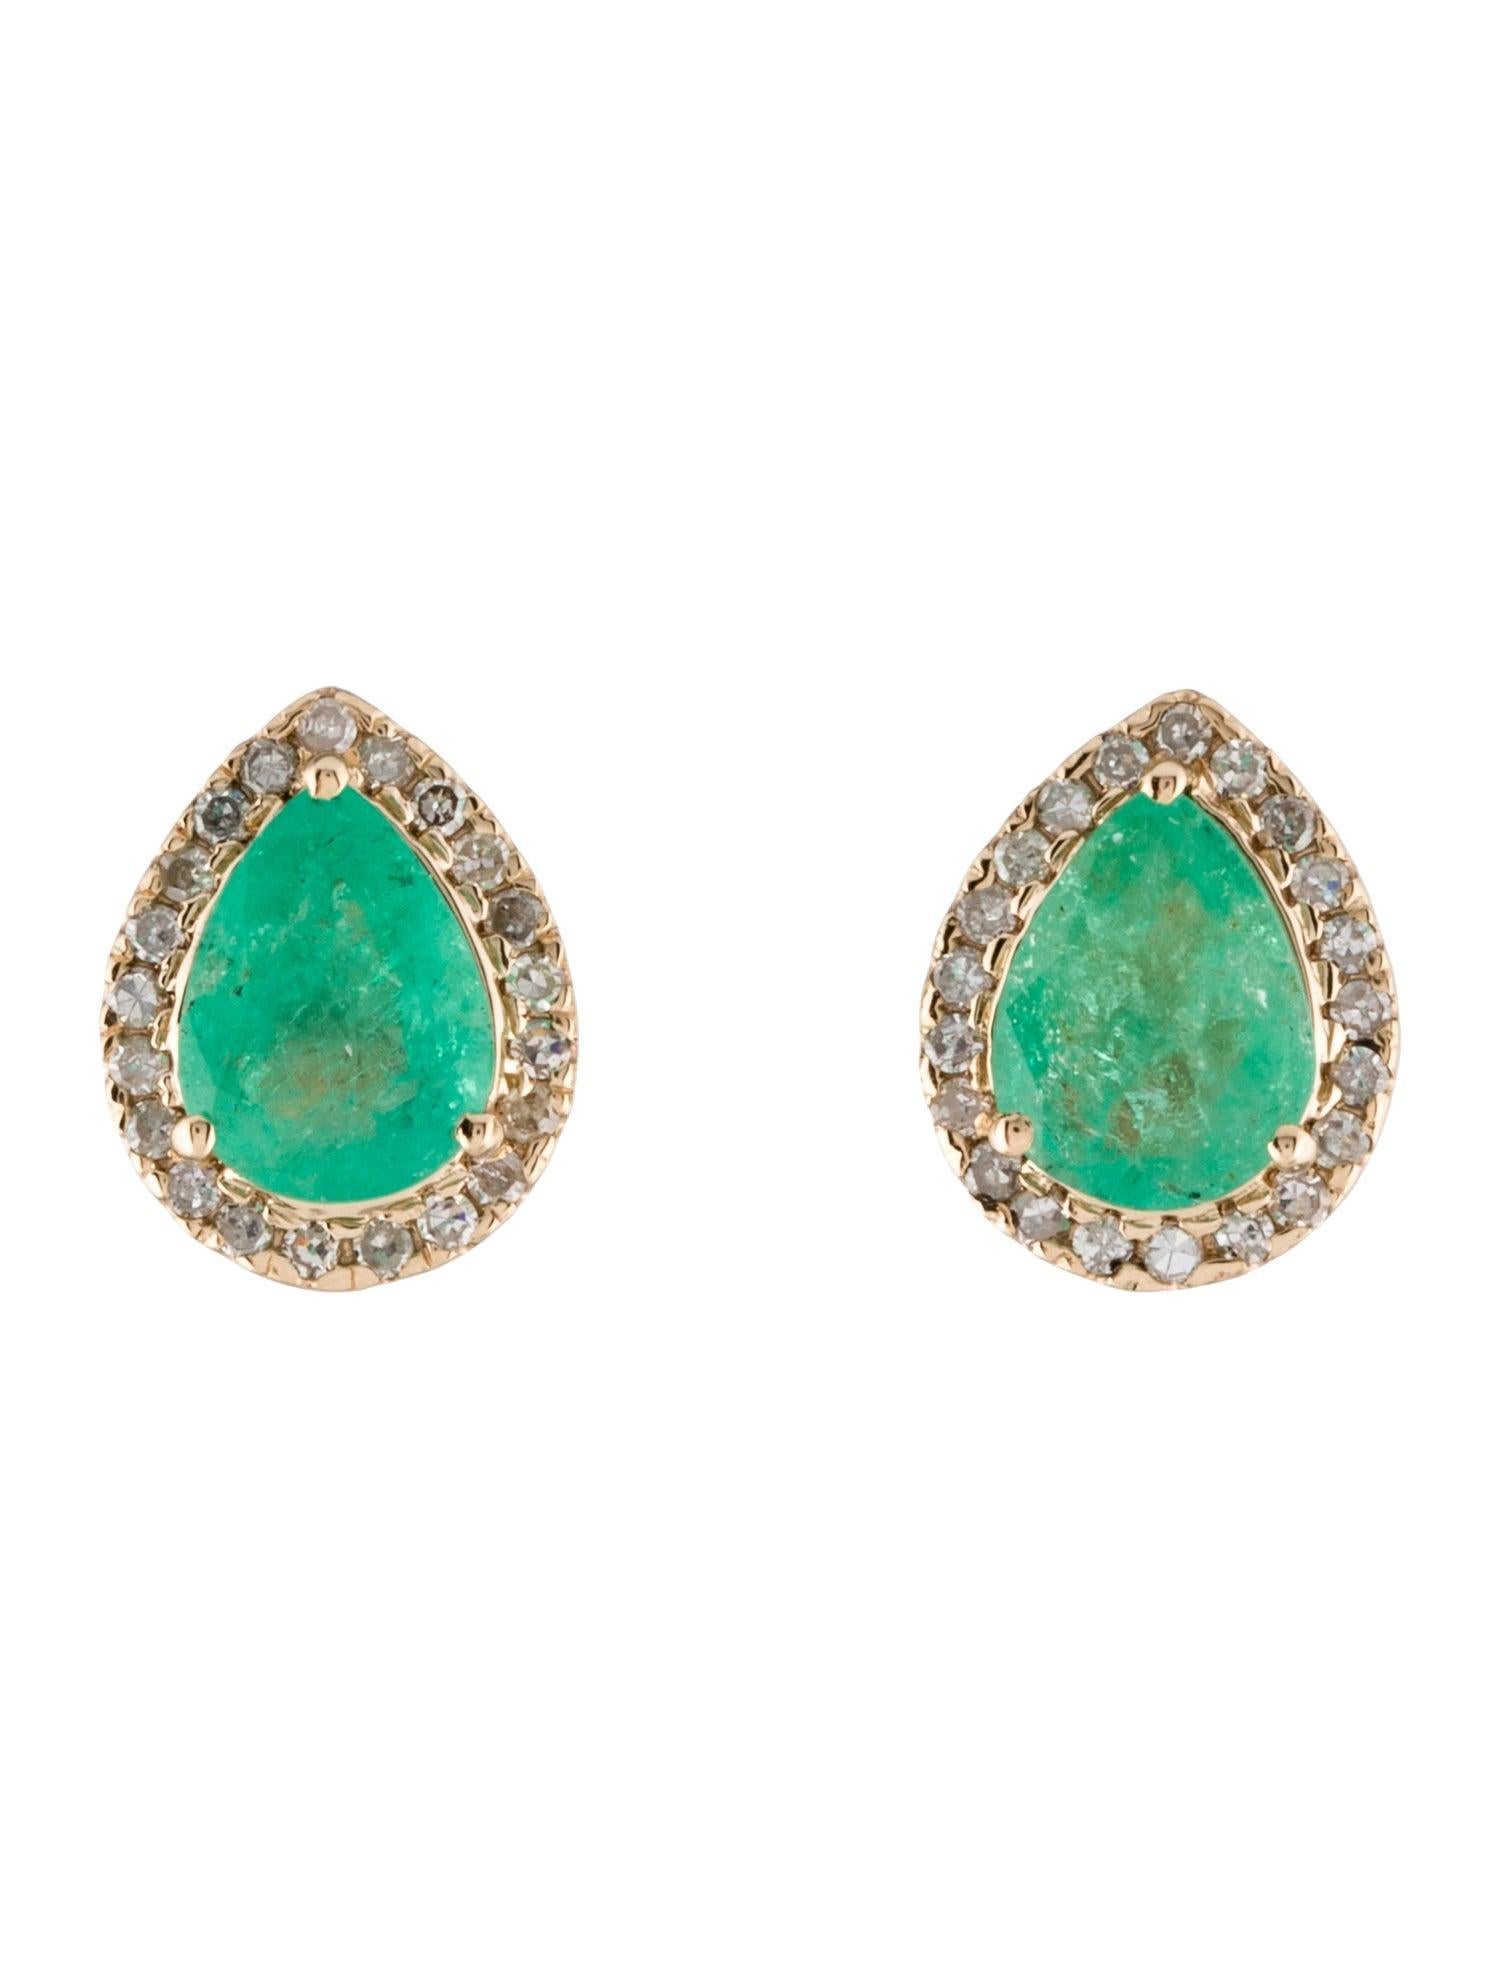 Introduce timeless elegance to your collection with our 14K Yellow Gold Stud Earrings, each featuring a mesmerizing 2.06 carat faceted pear-shaped Emerald. These exquisite earrings blend the lush vibrancy of green emeralds with the subtle brilliance